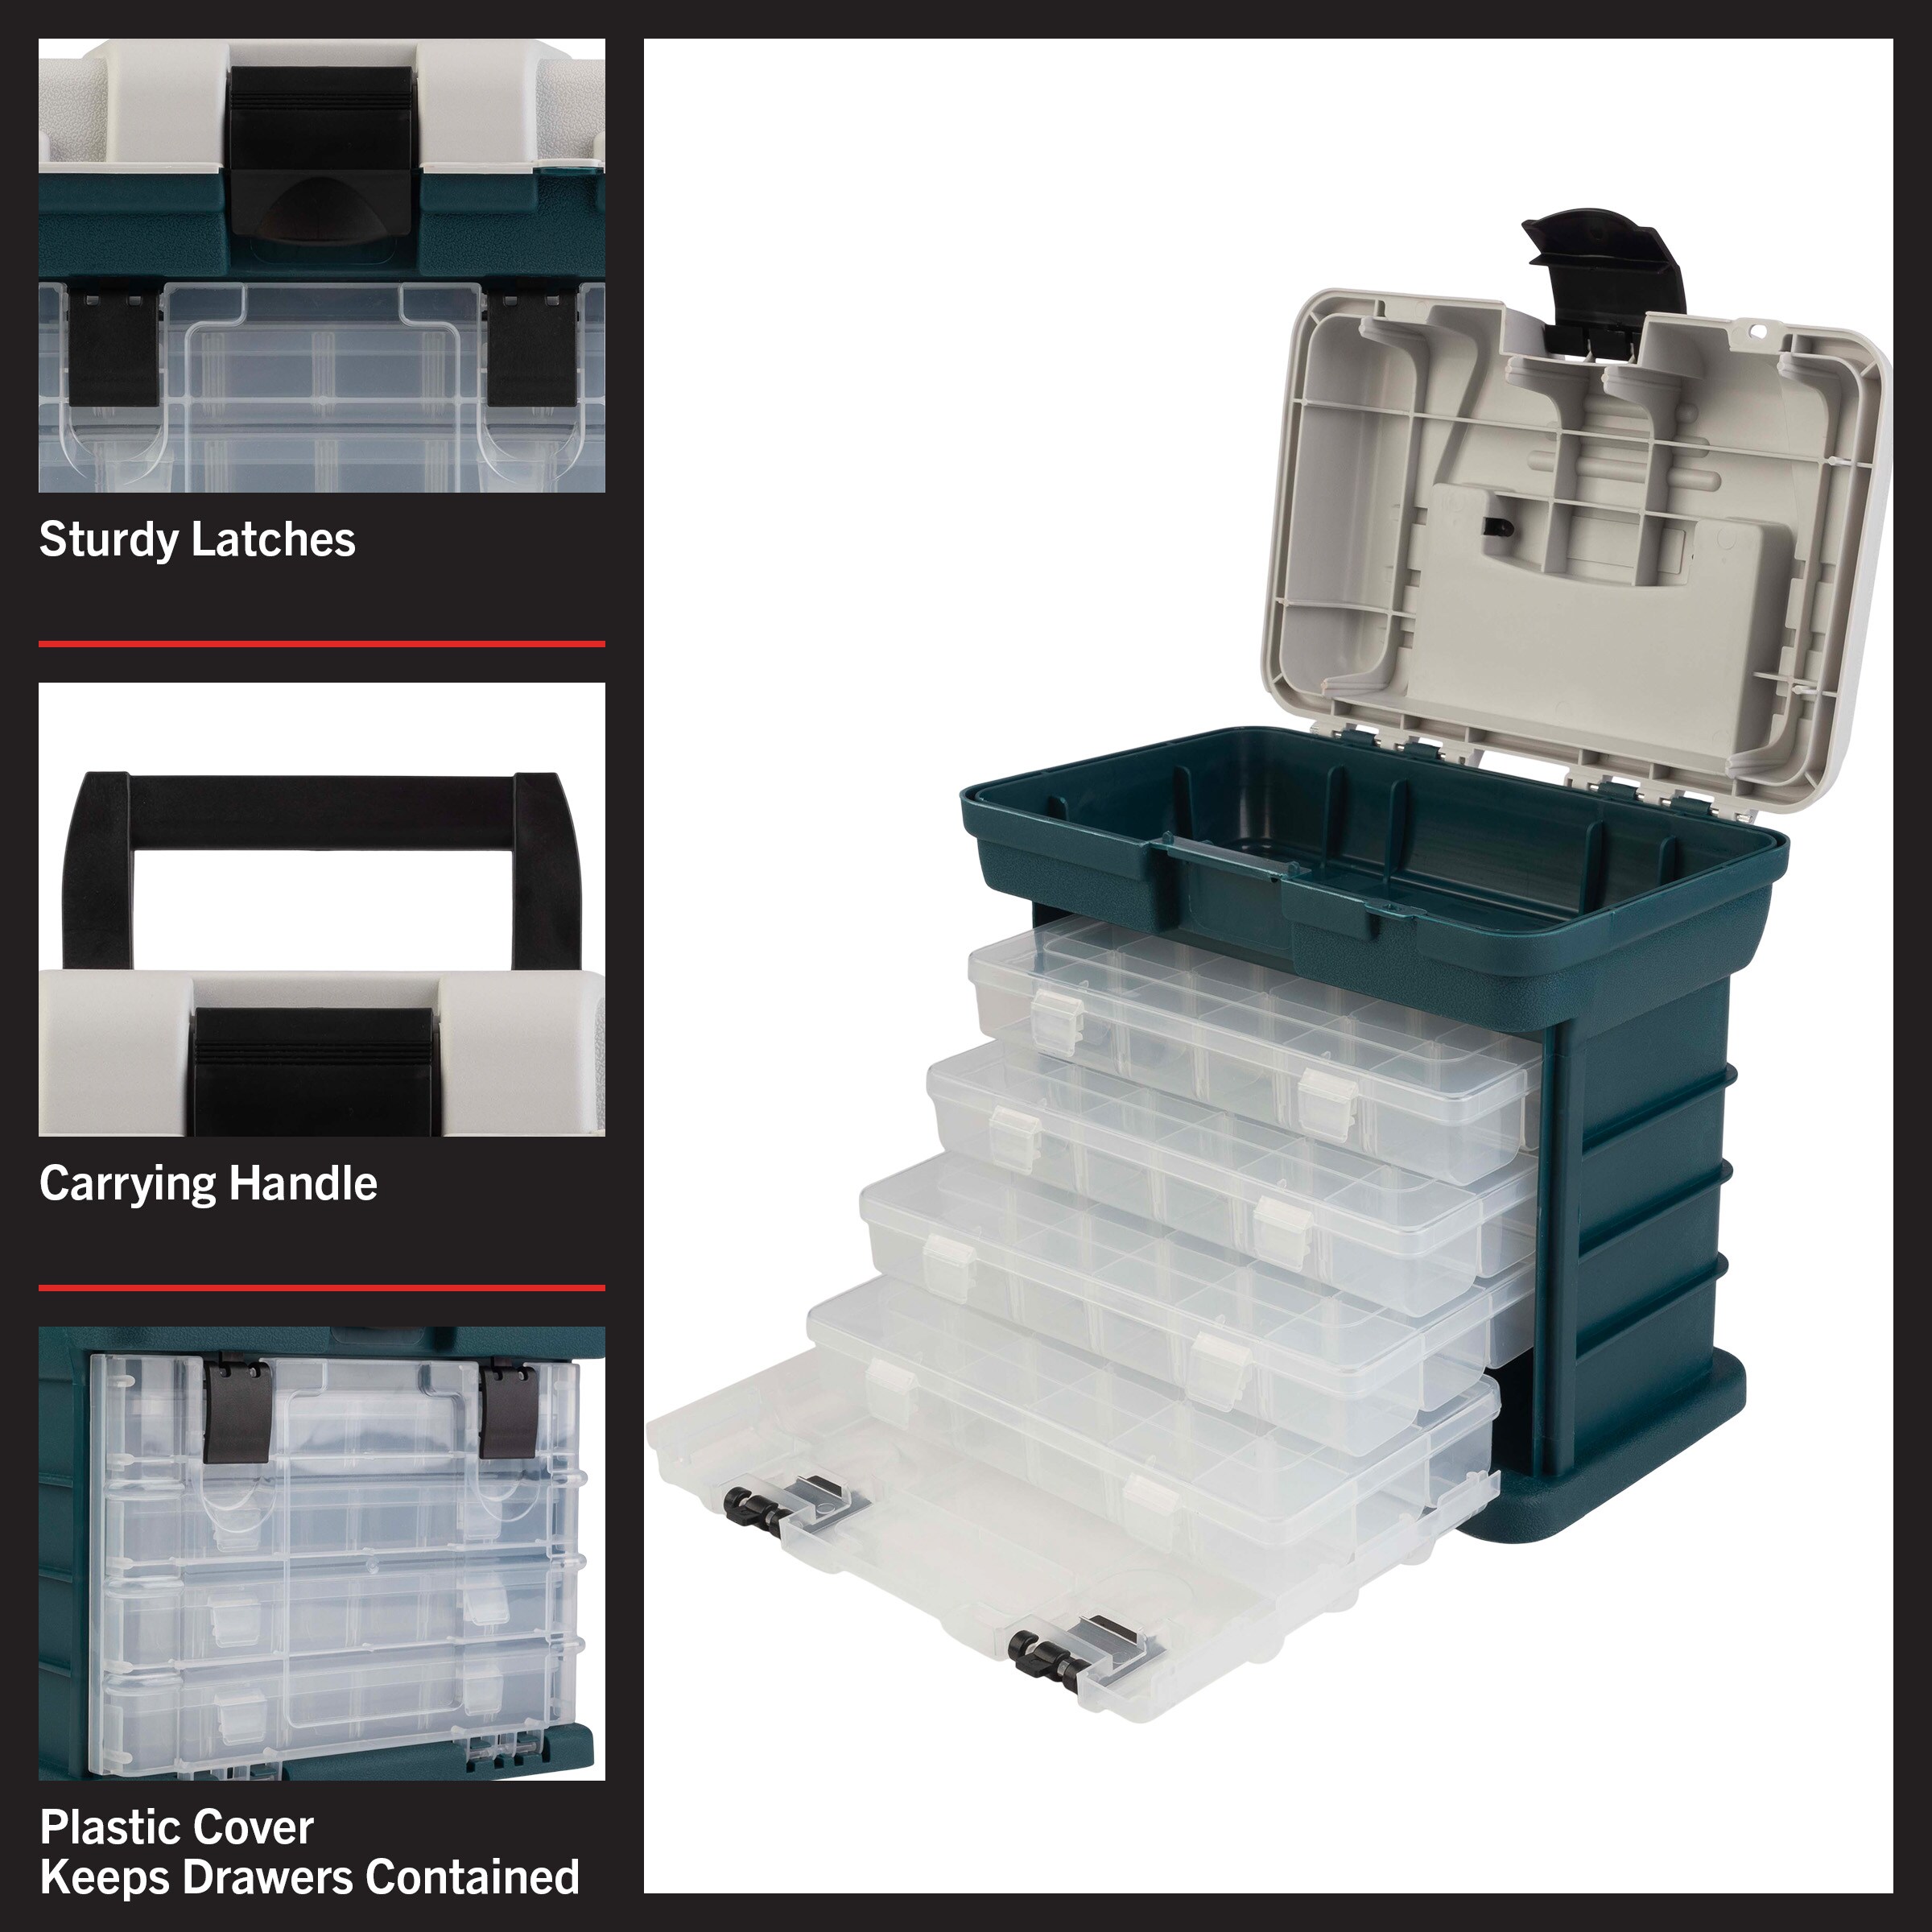 Stalwart Small Parts Organizer with Plastic Storage Bins - Steel Rack with  Removable Drawers Garage & Reviews